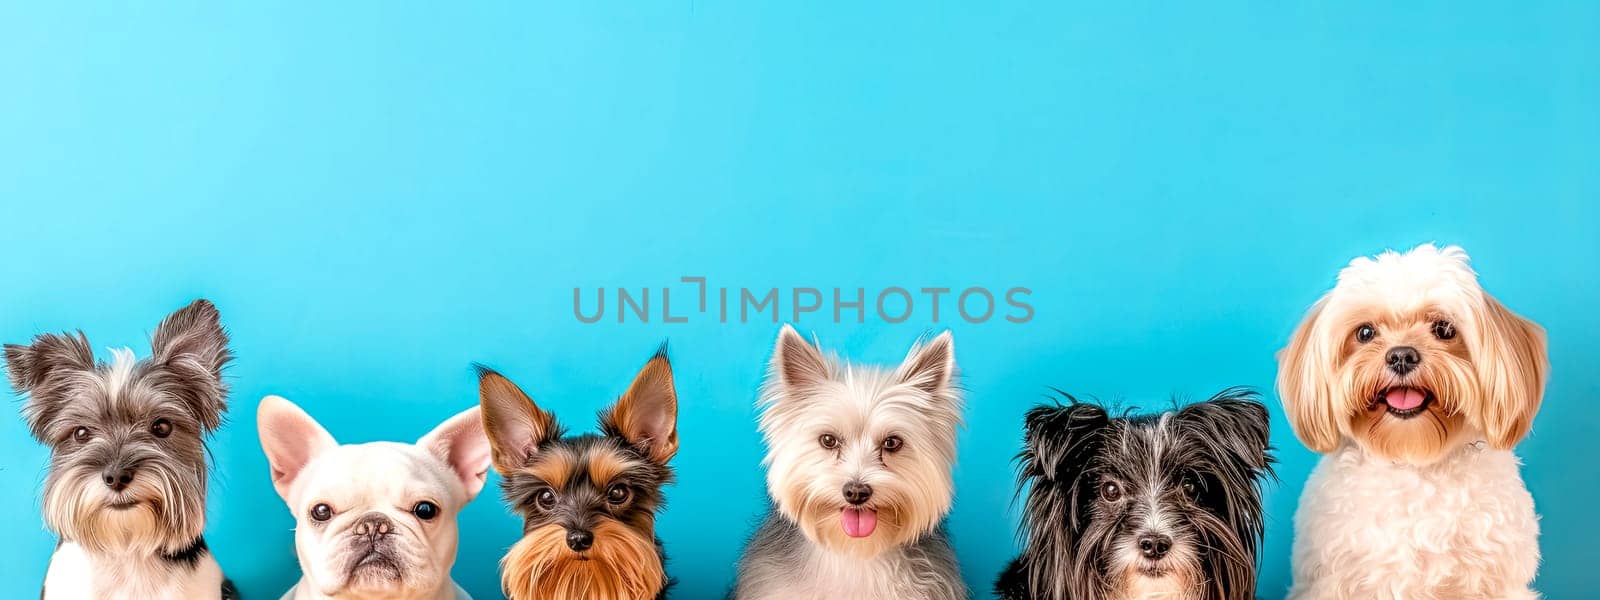 Adorable Group of Small Dog Breeds Posing Together on Blue Background by Edophoto